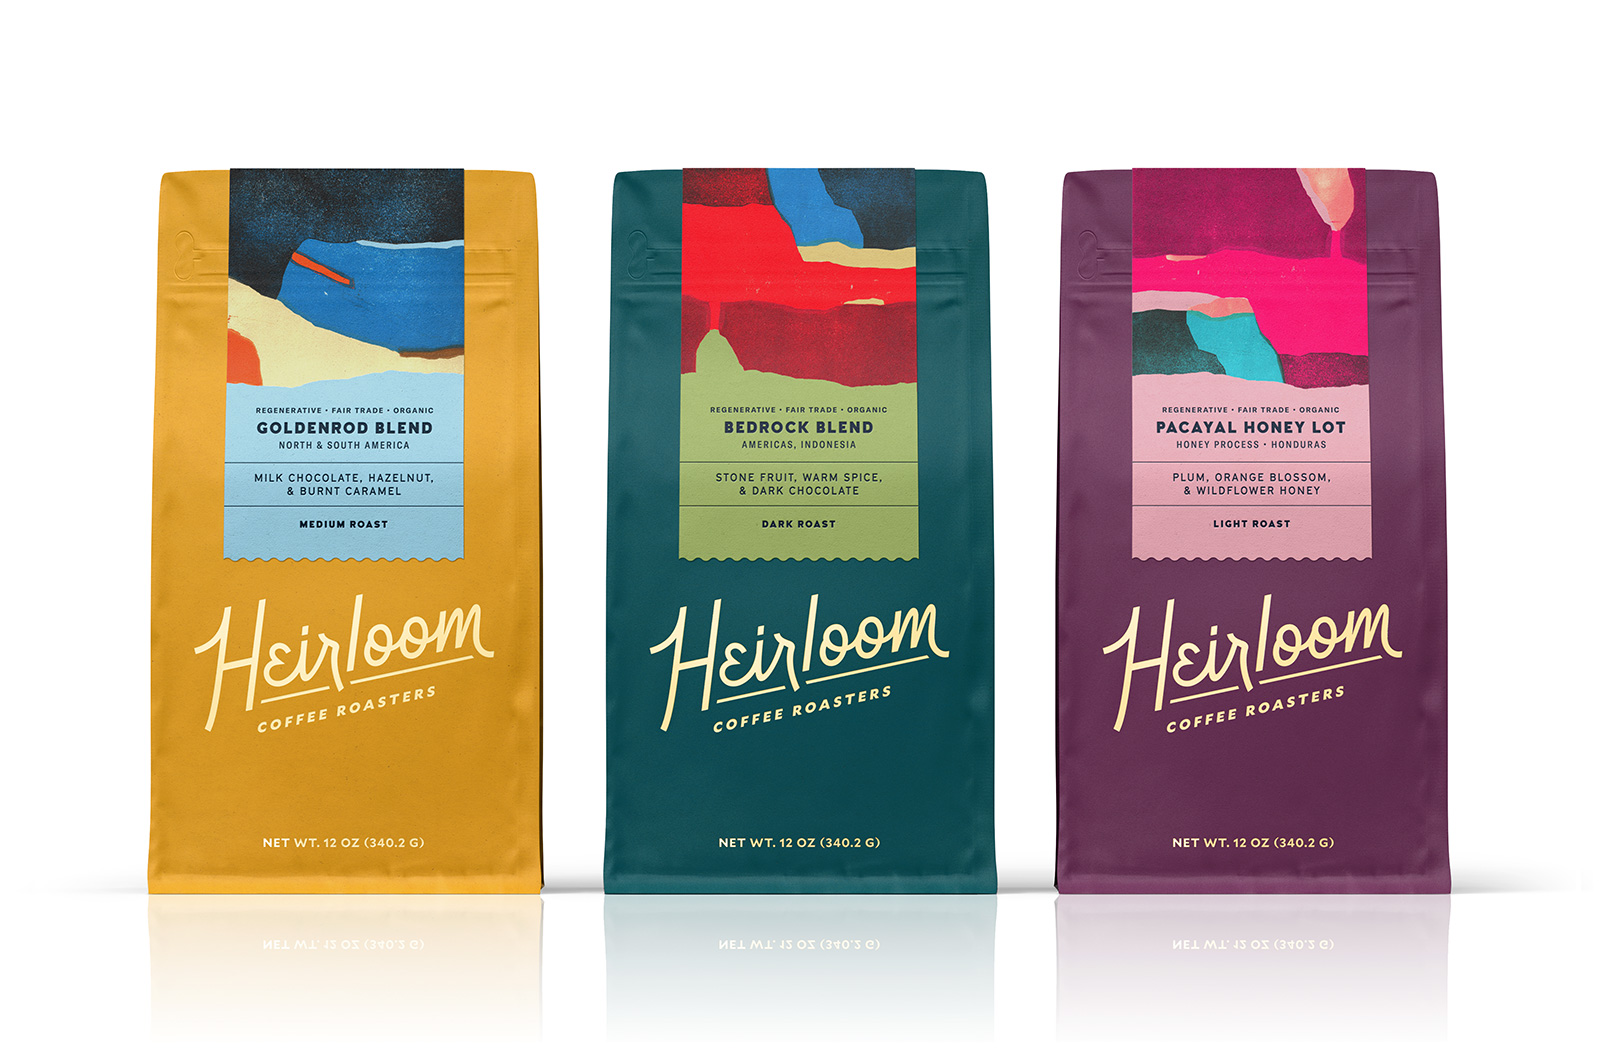 Pavement Creates Colorful New Identity for Heirloom Coffee Roasters